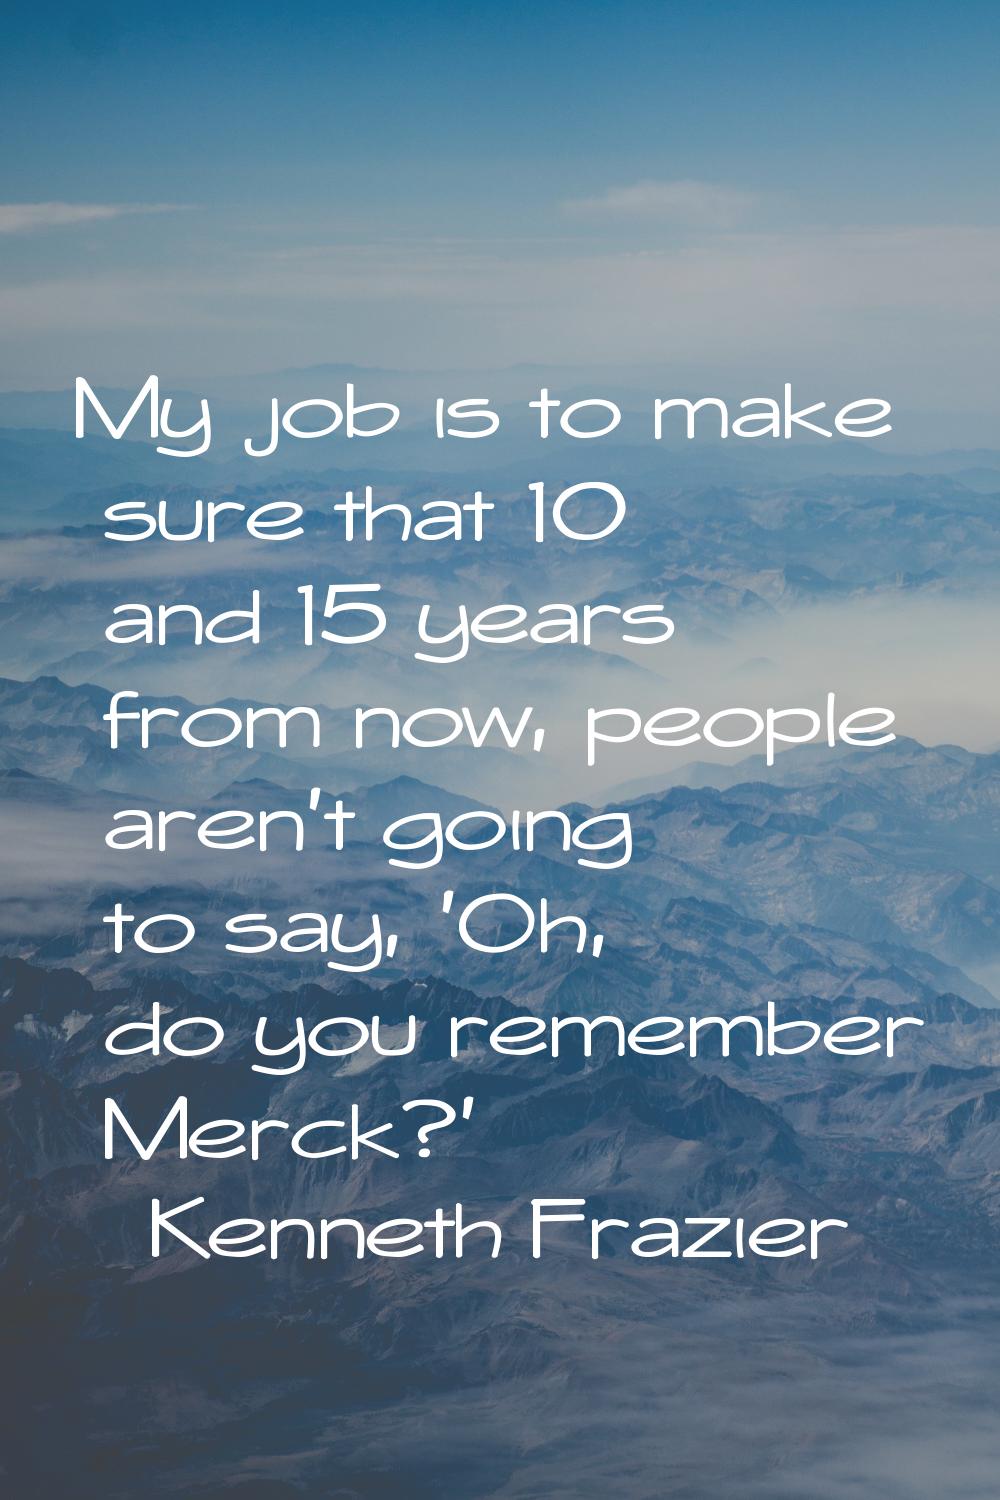 My job is to make sure that 10 and 15 years from now, people aren't going to say, 'Oh, do you remem